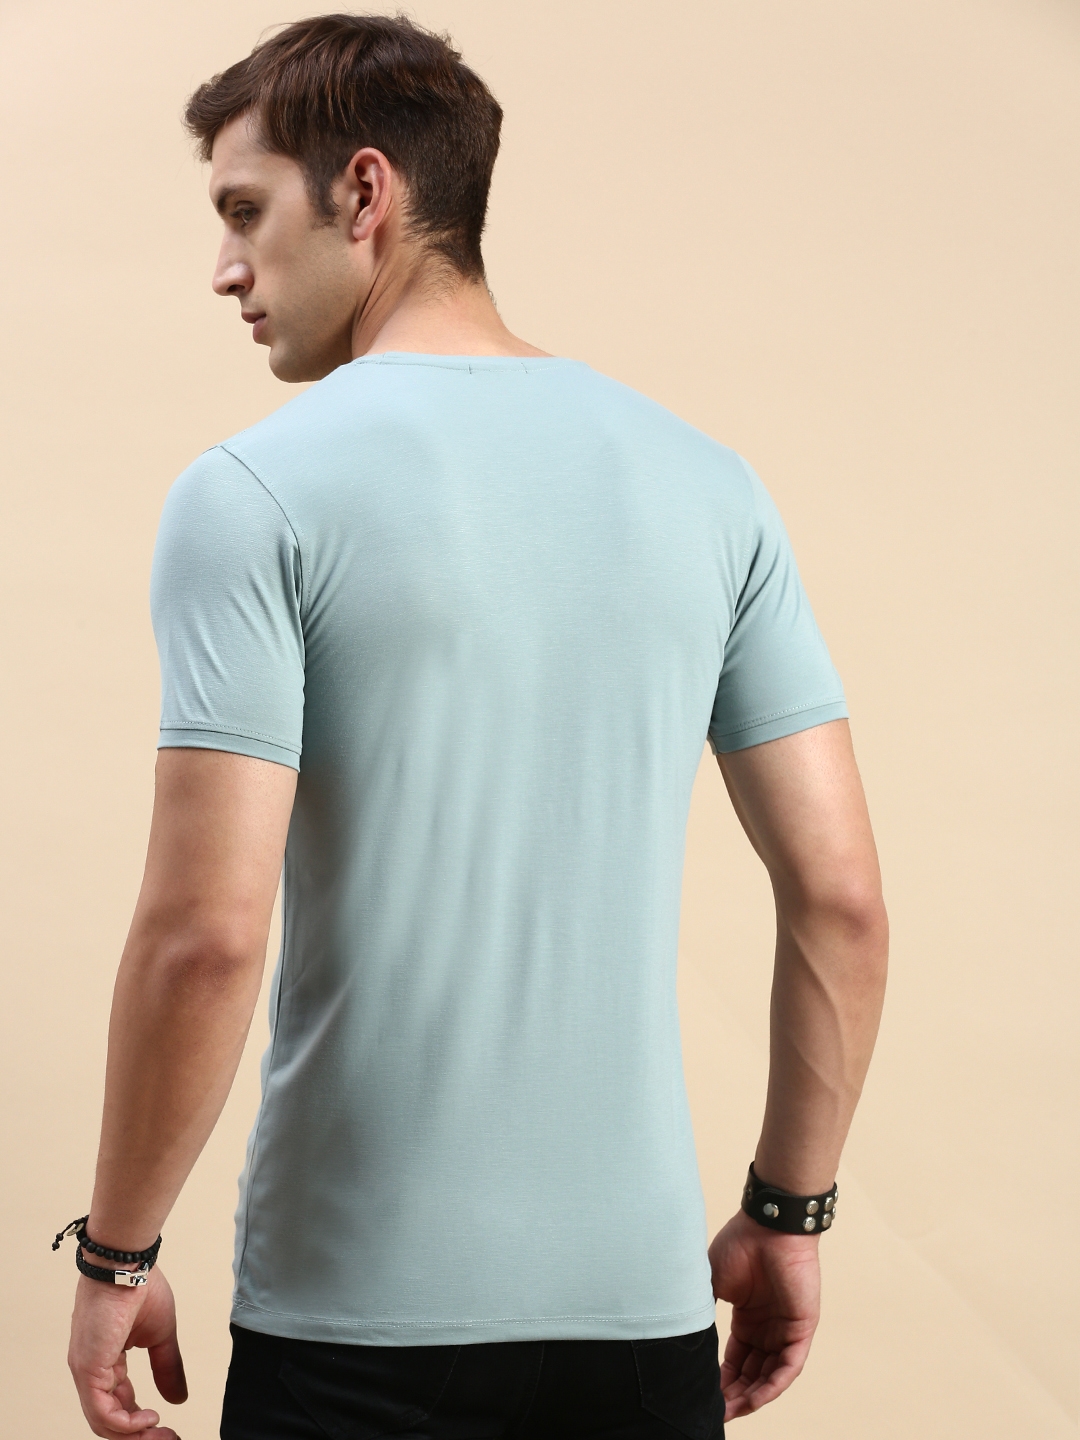 Showoff | SHOWOFF Men's Round Neck Short Sleeves Typography Sea Green Slim Fit T-Shirt 3